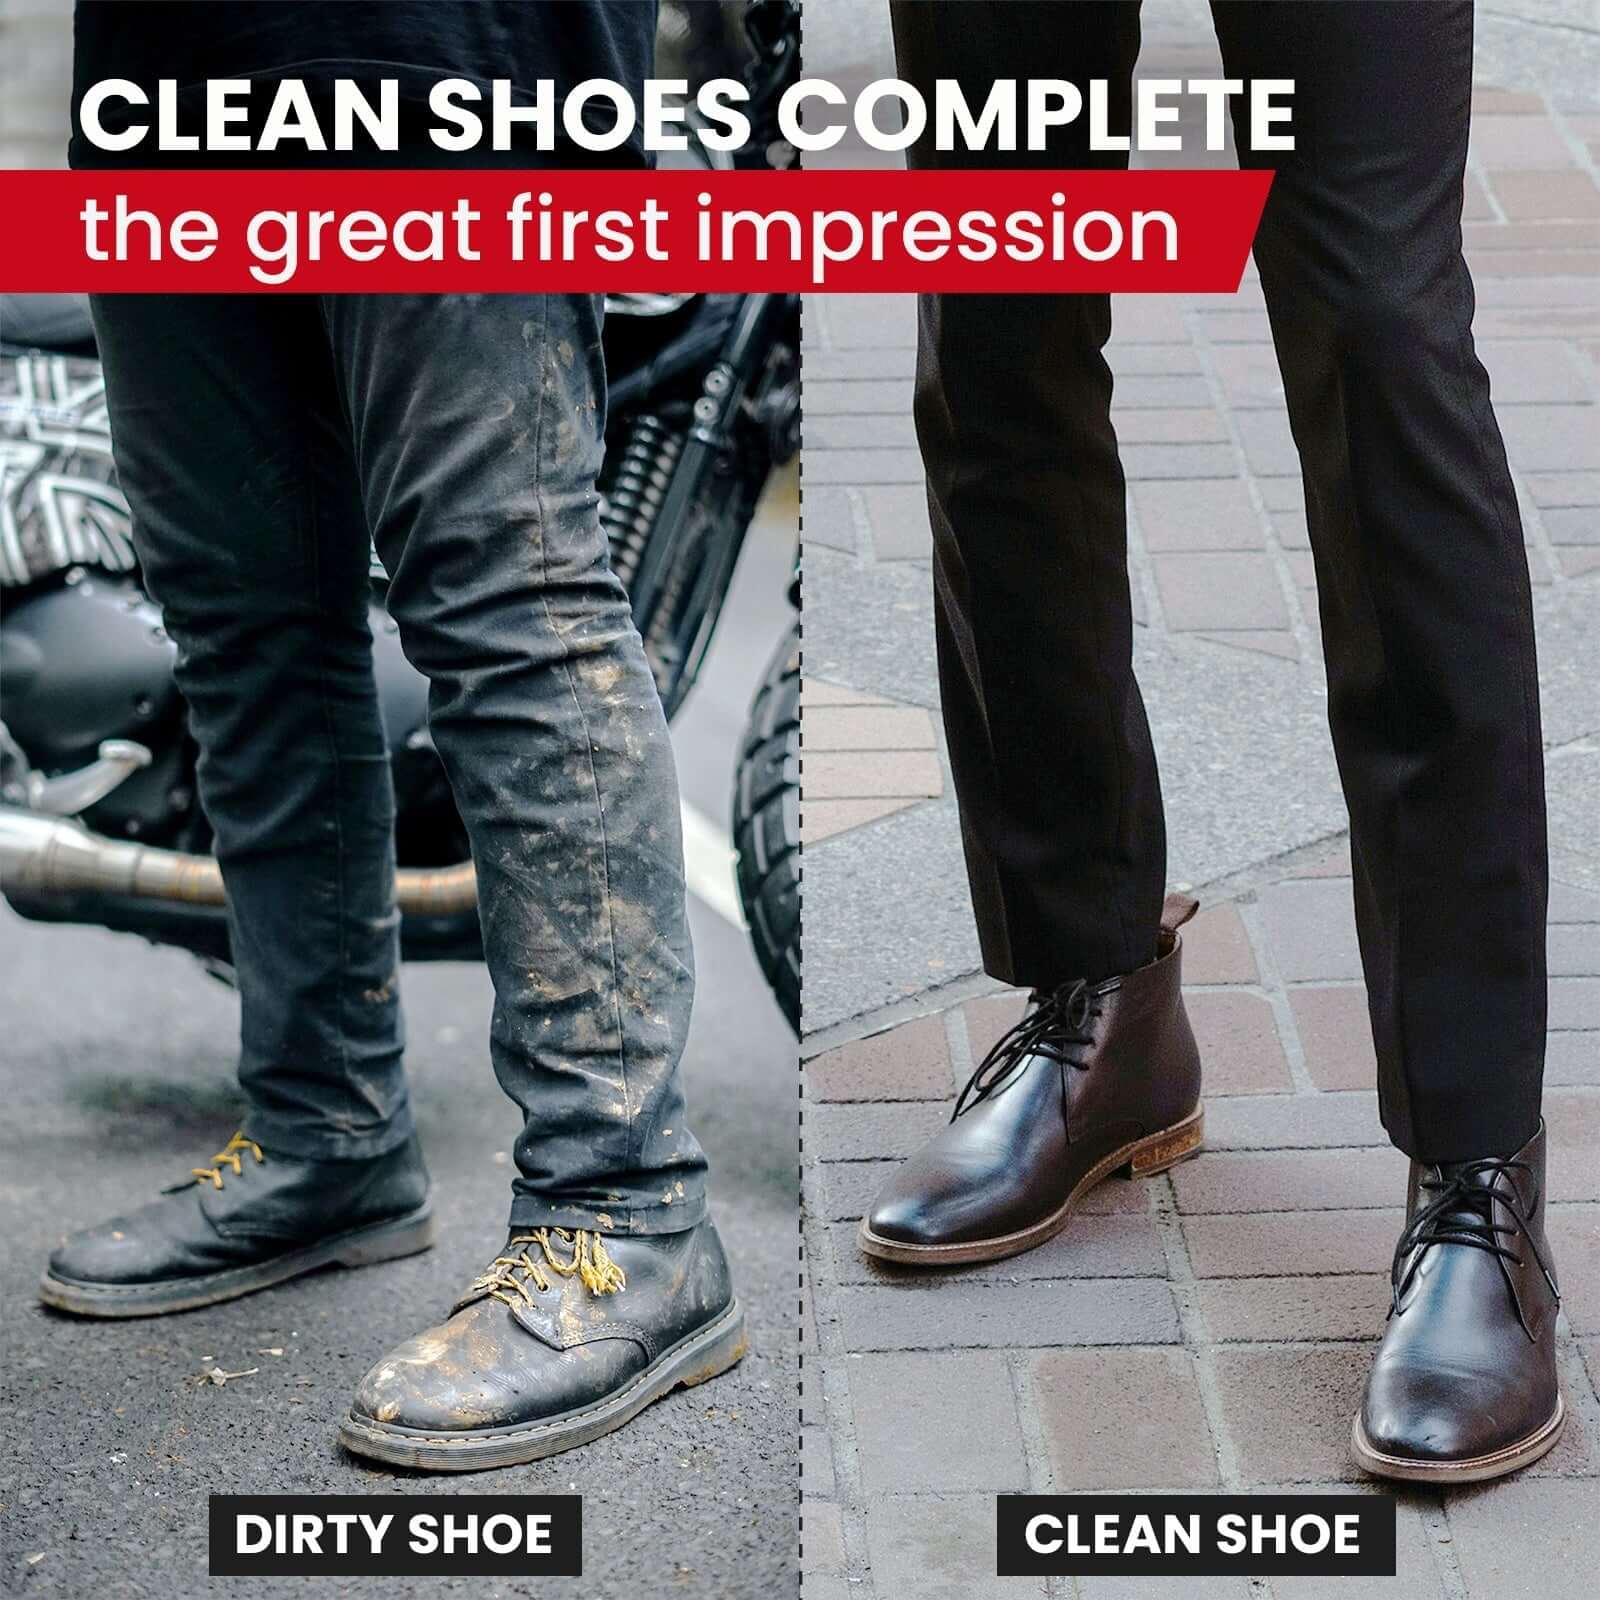 Shoe cleaning service, it's time to say goodbye to dirty shoes